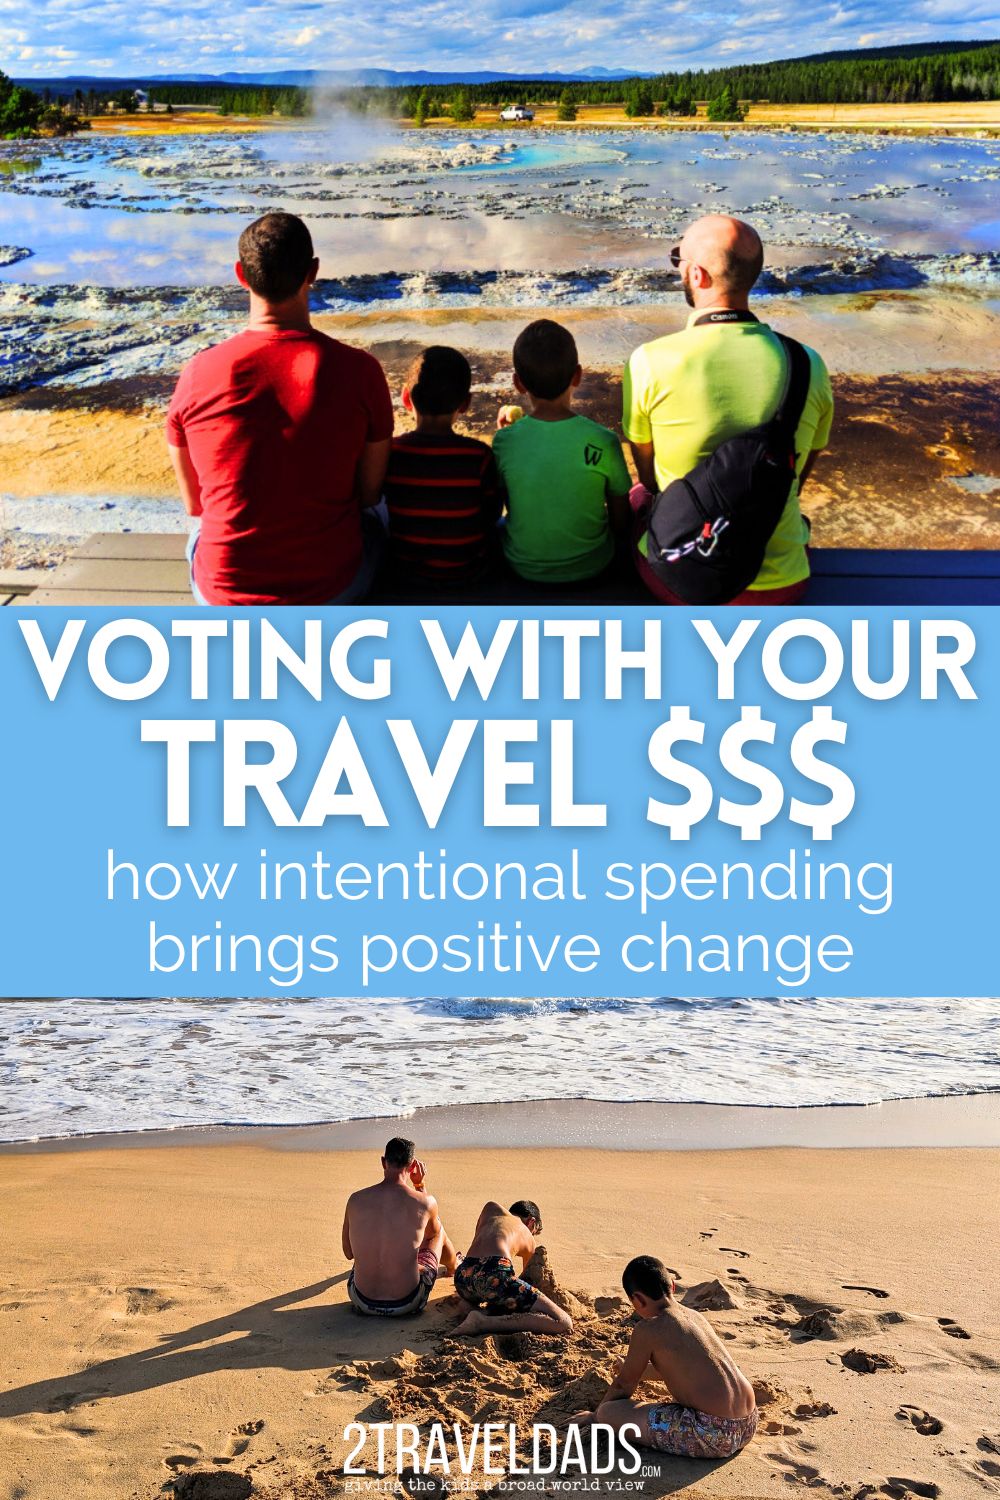 Voting with your dollars is more important than ever as the USA faces all kinds of turmoil. Making your travel decisions and contributing to the communities who are driving forces in progress is how to vote with your dollars.